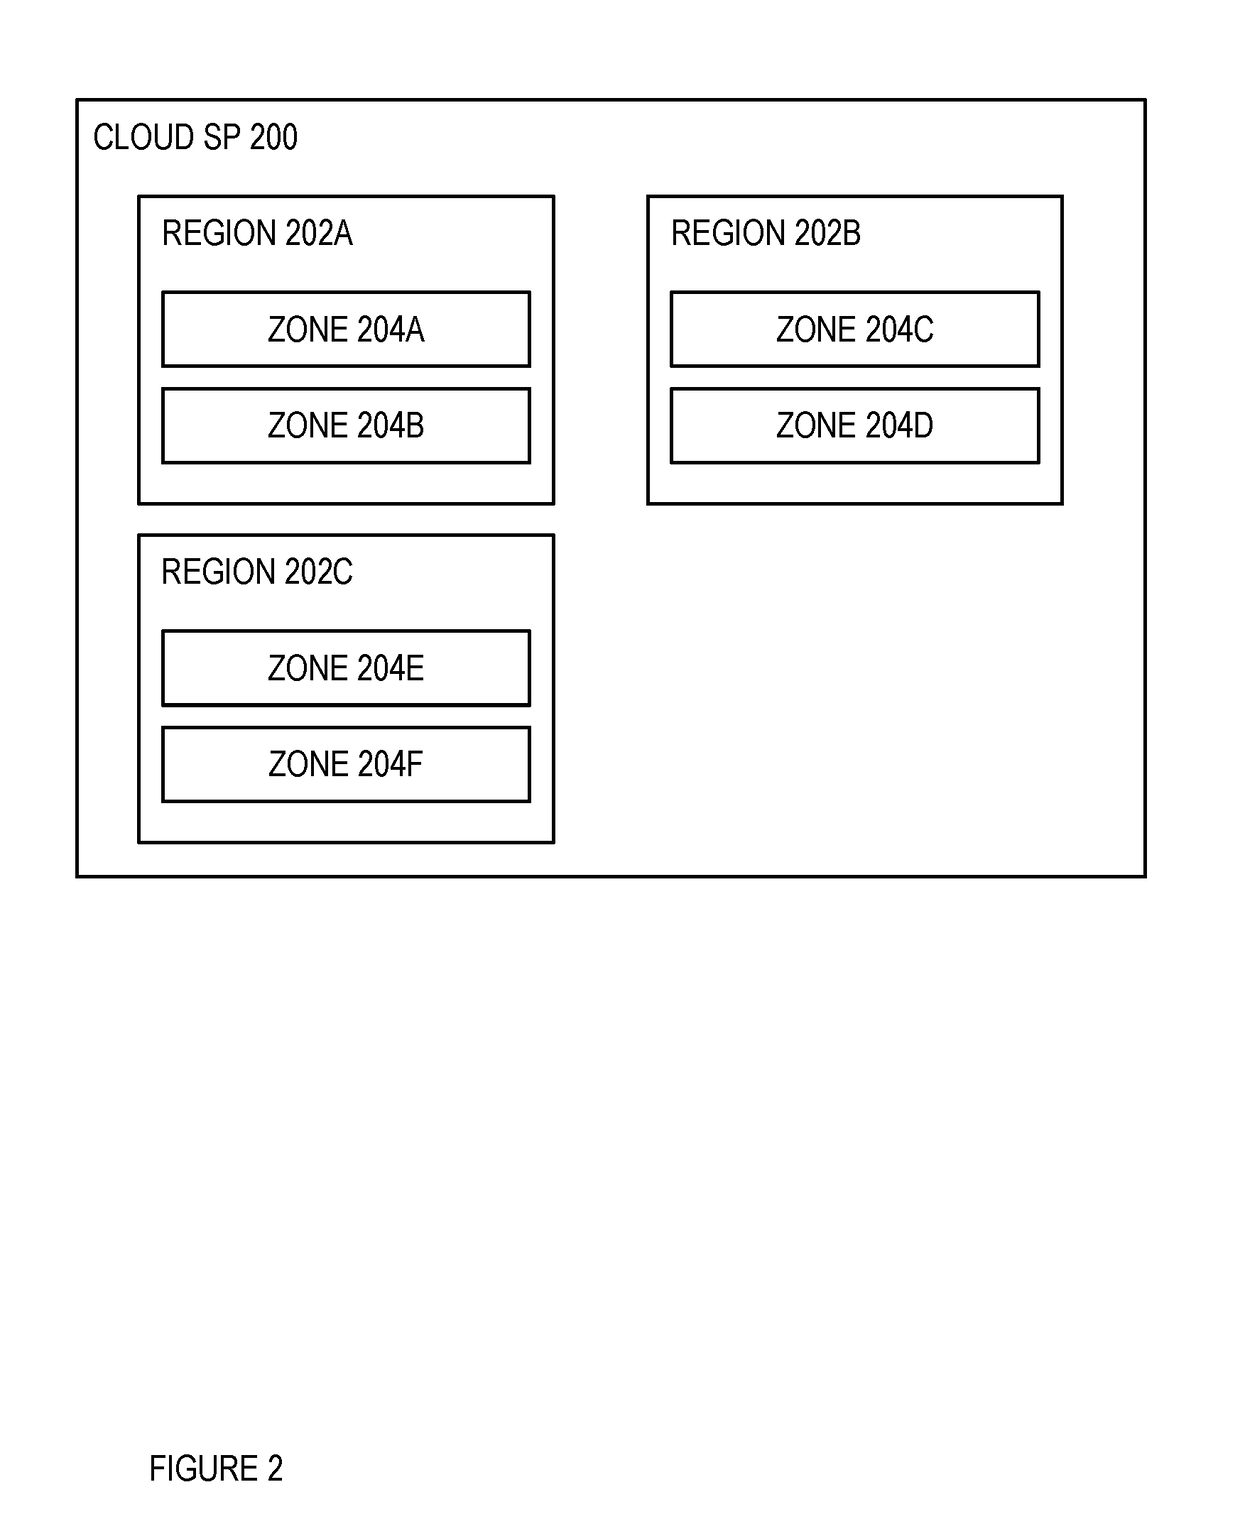 System and method of a cloud service provider tracer